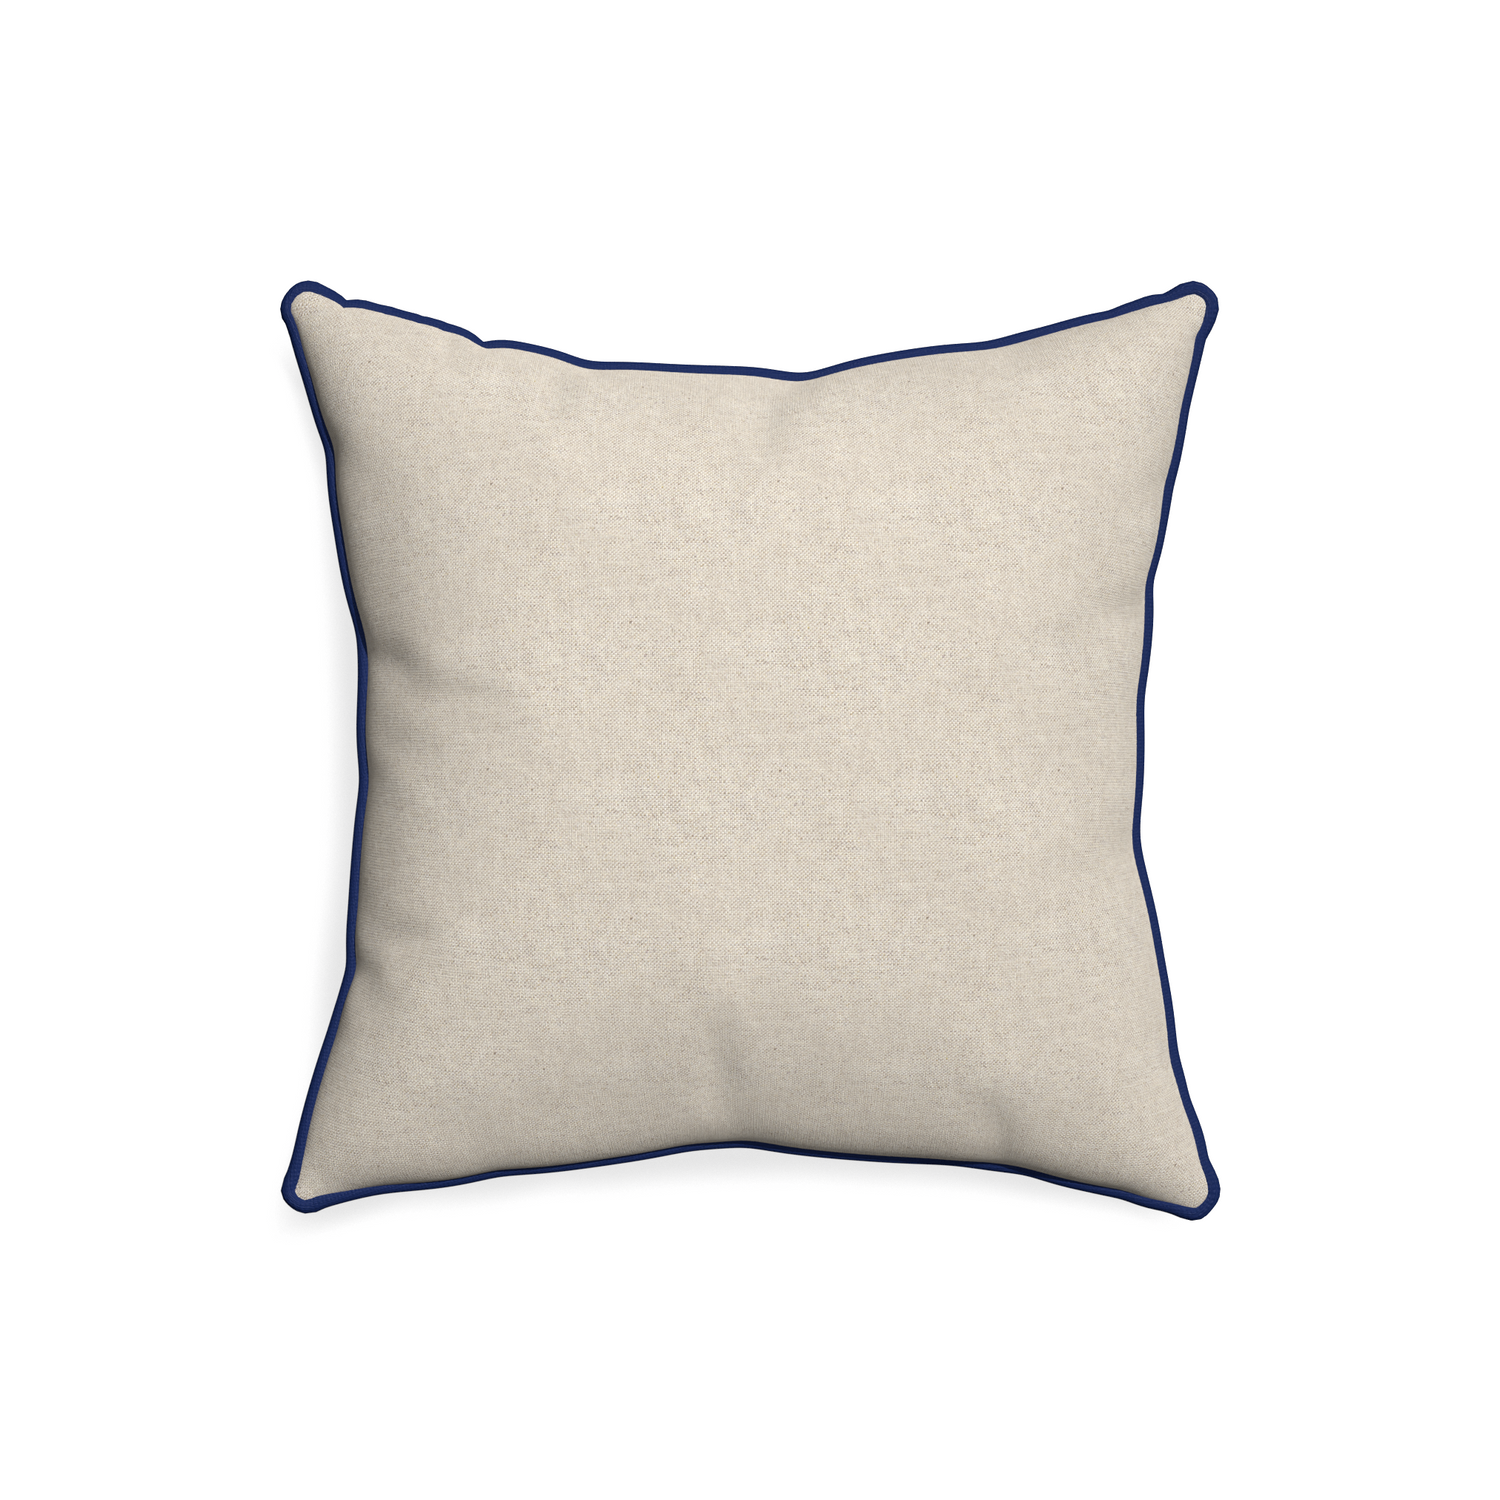 20-square oat custom light brownpillow with midnight piping on white background